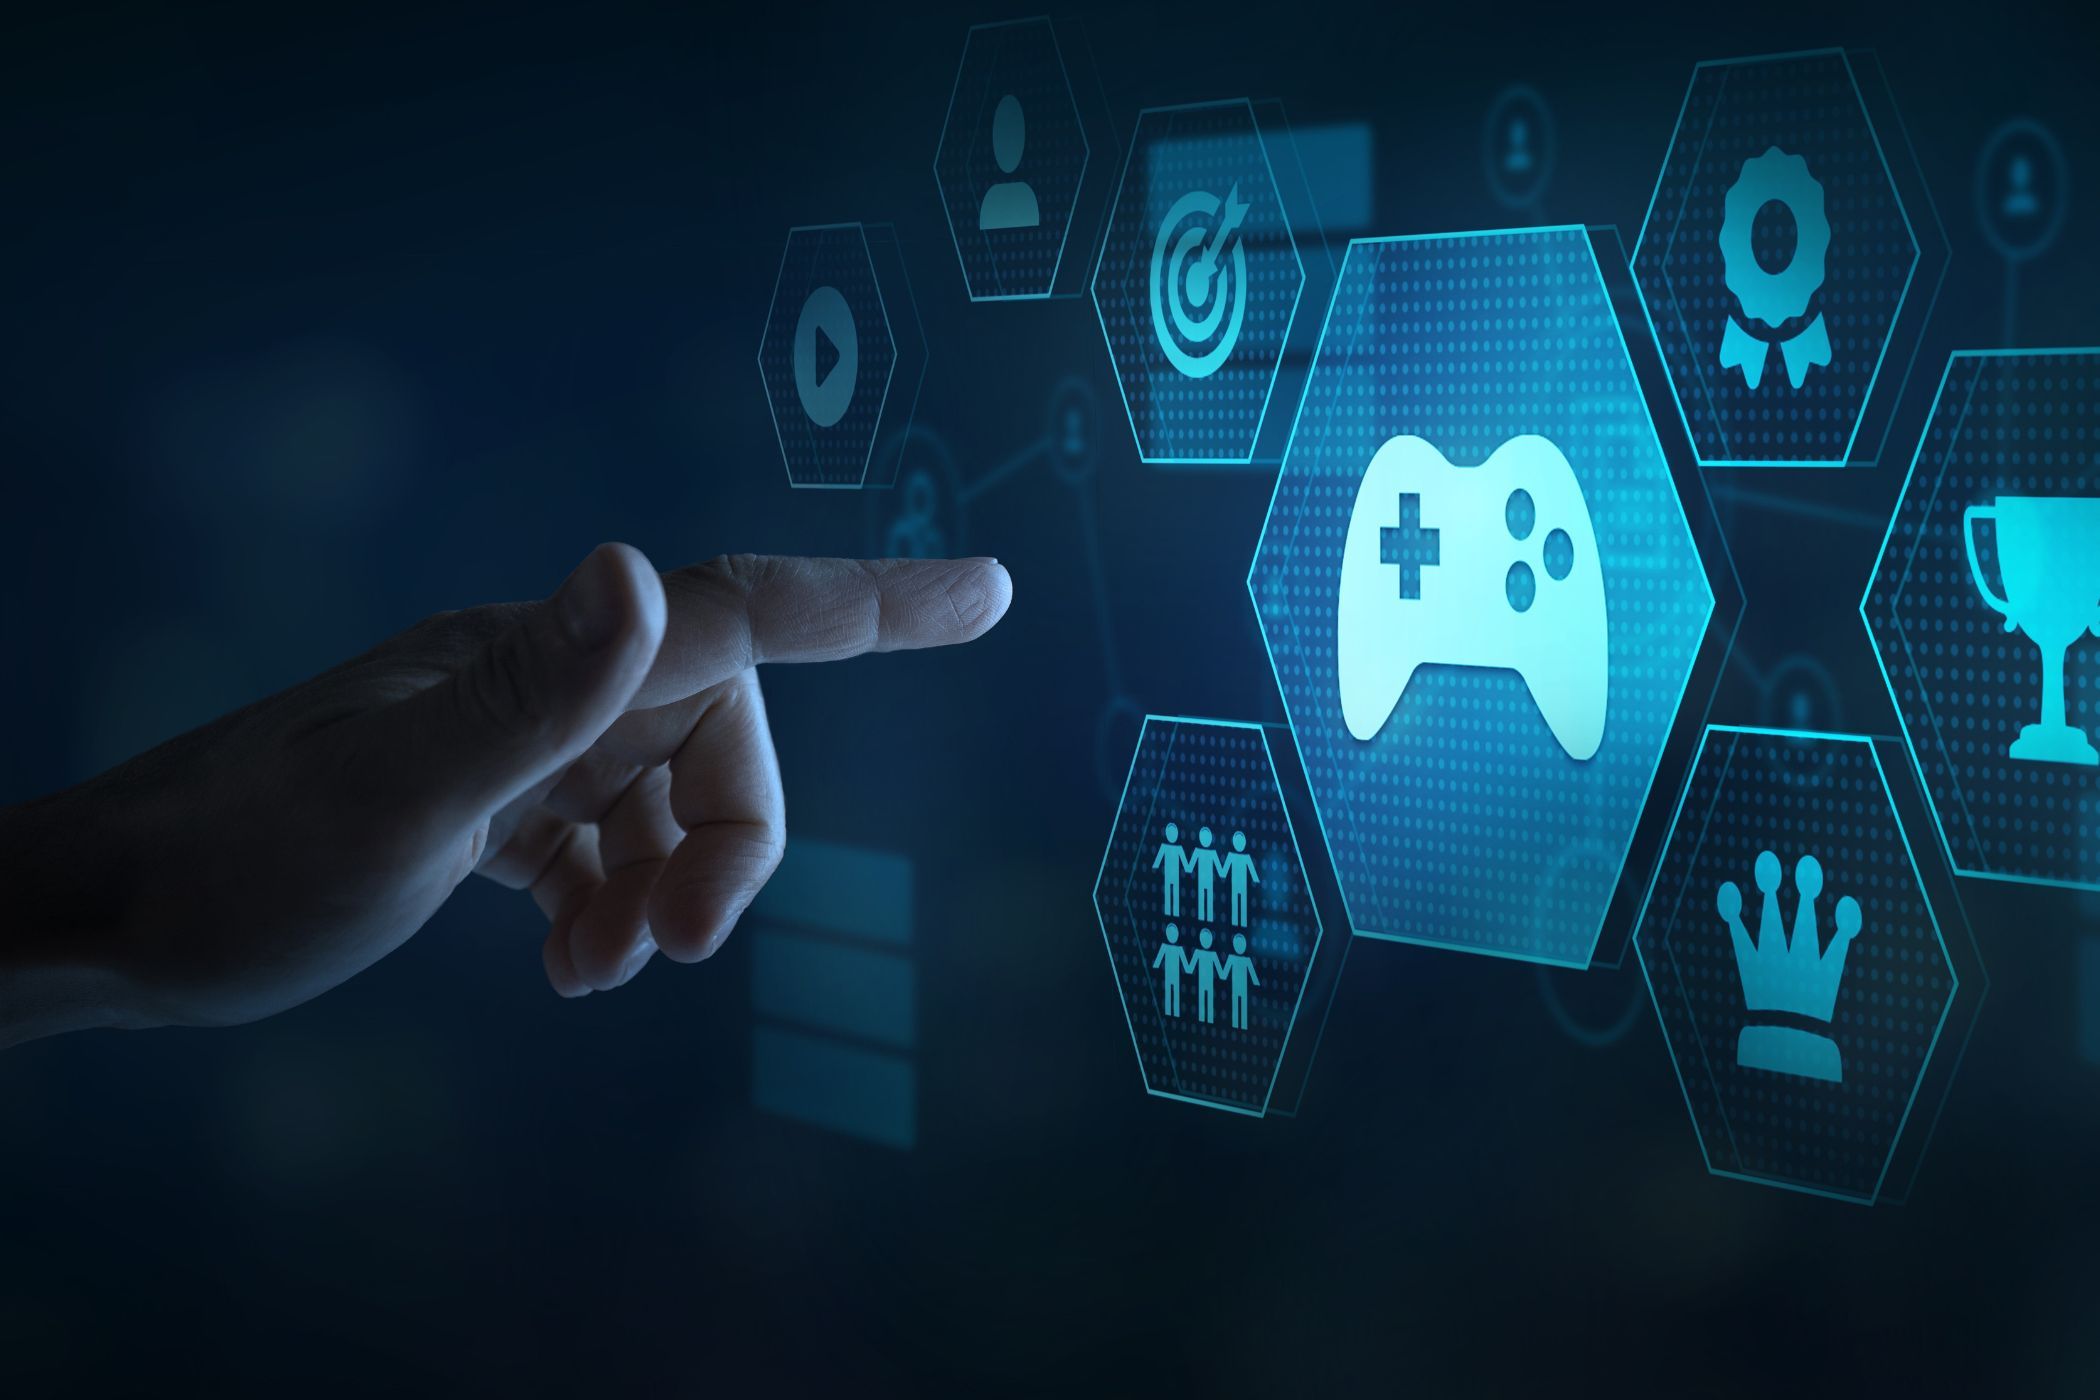 game icons floating near a hand, indicating digital games